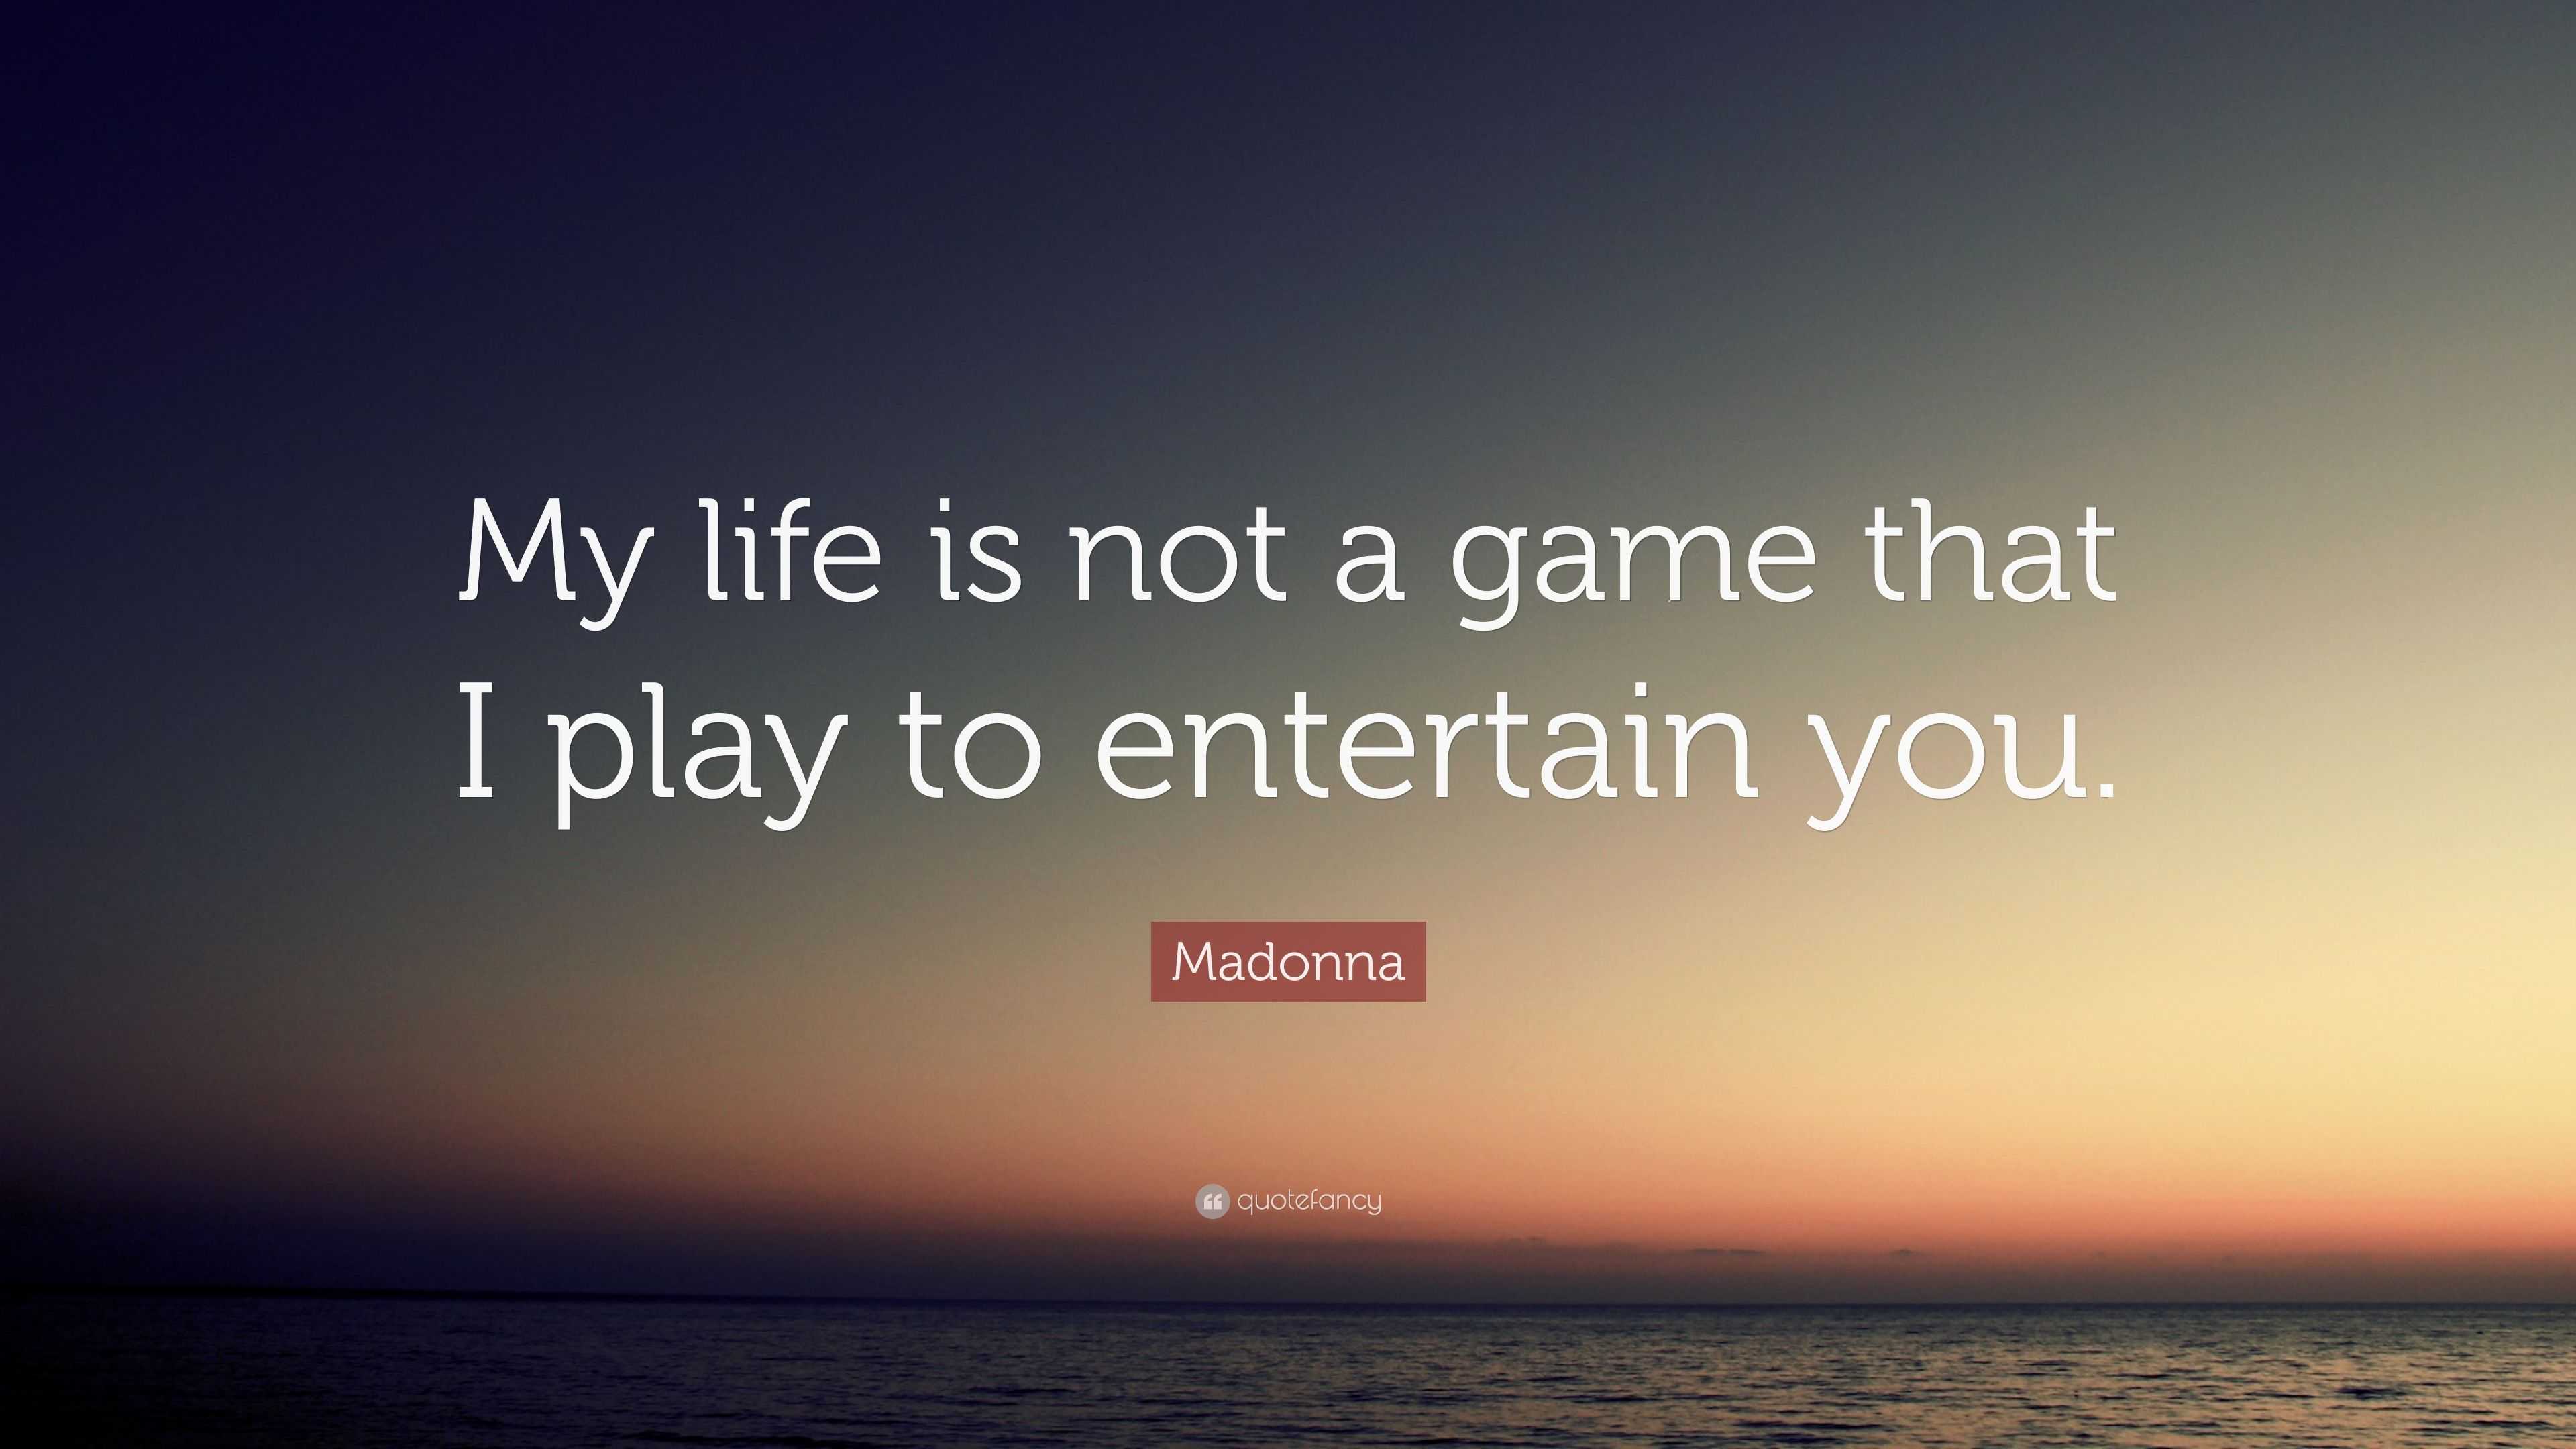 Madonna Quote: “My life is not a game that I play to entertain you.”